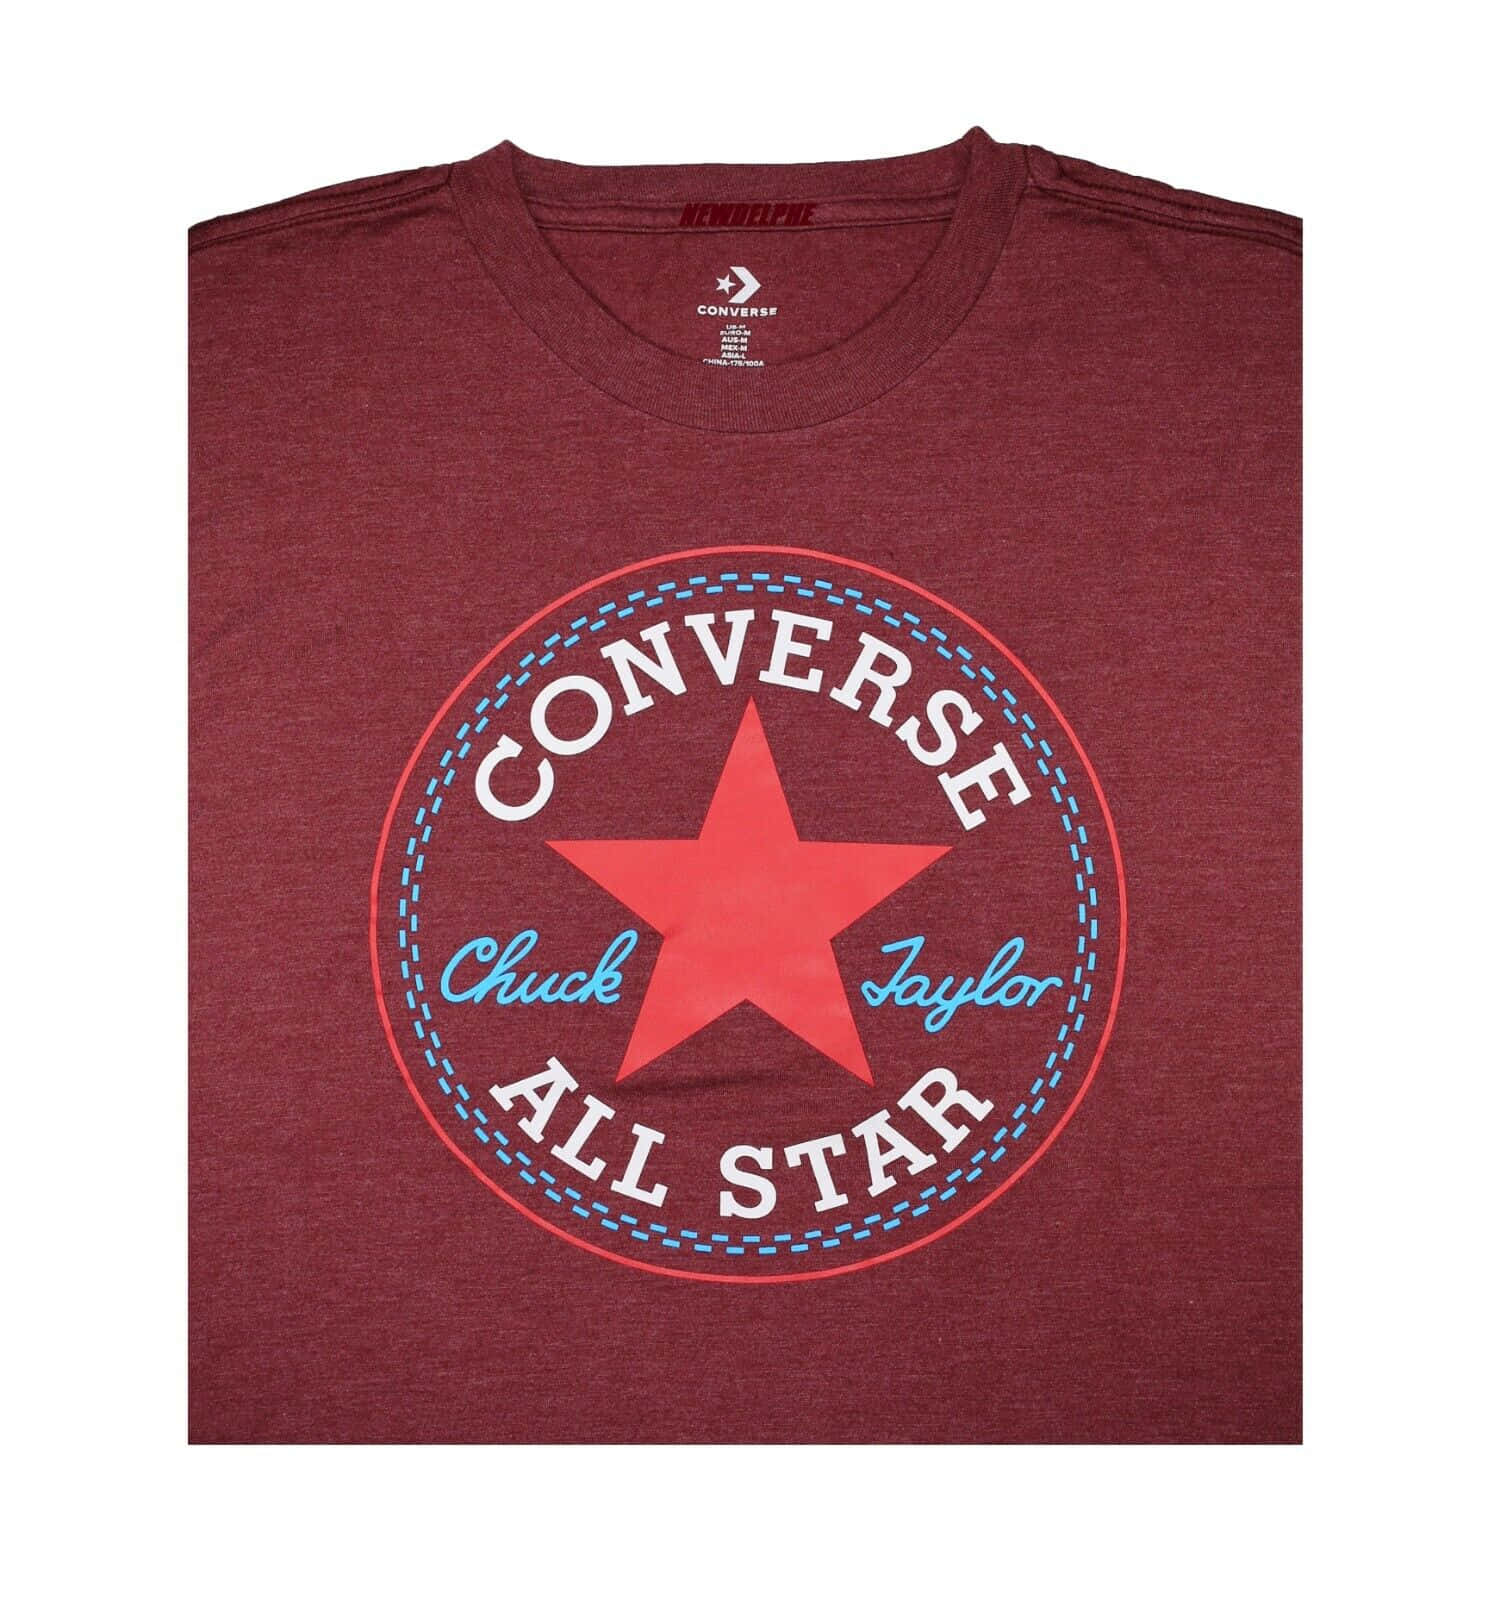 Find Your Cool with Converse